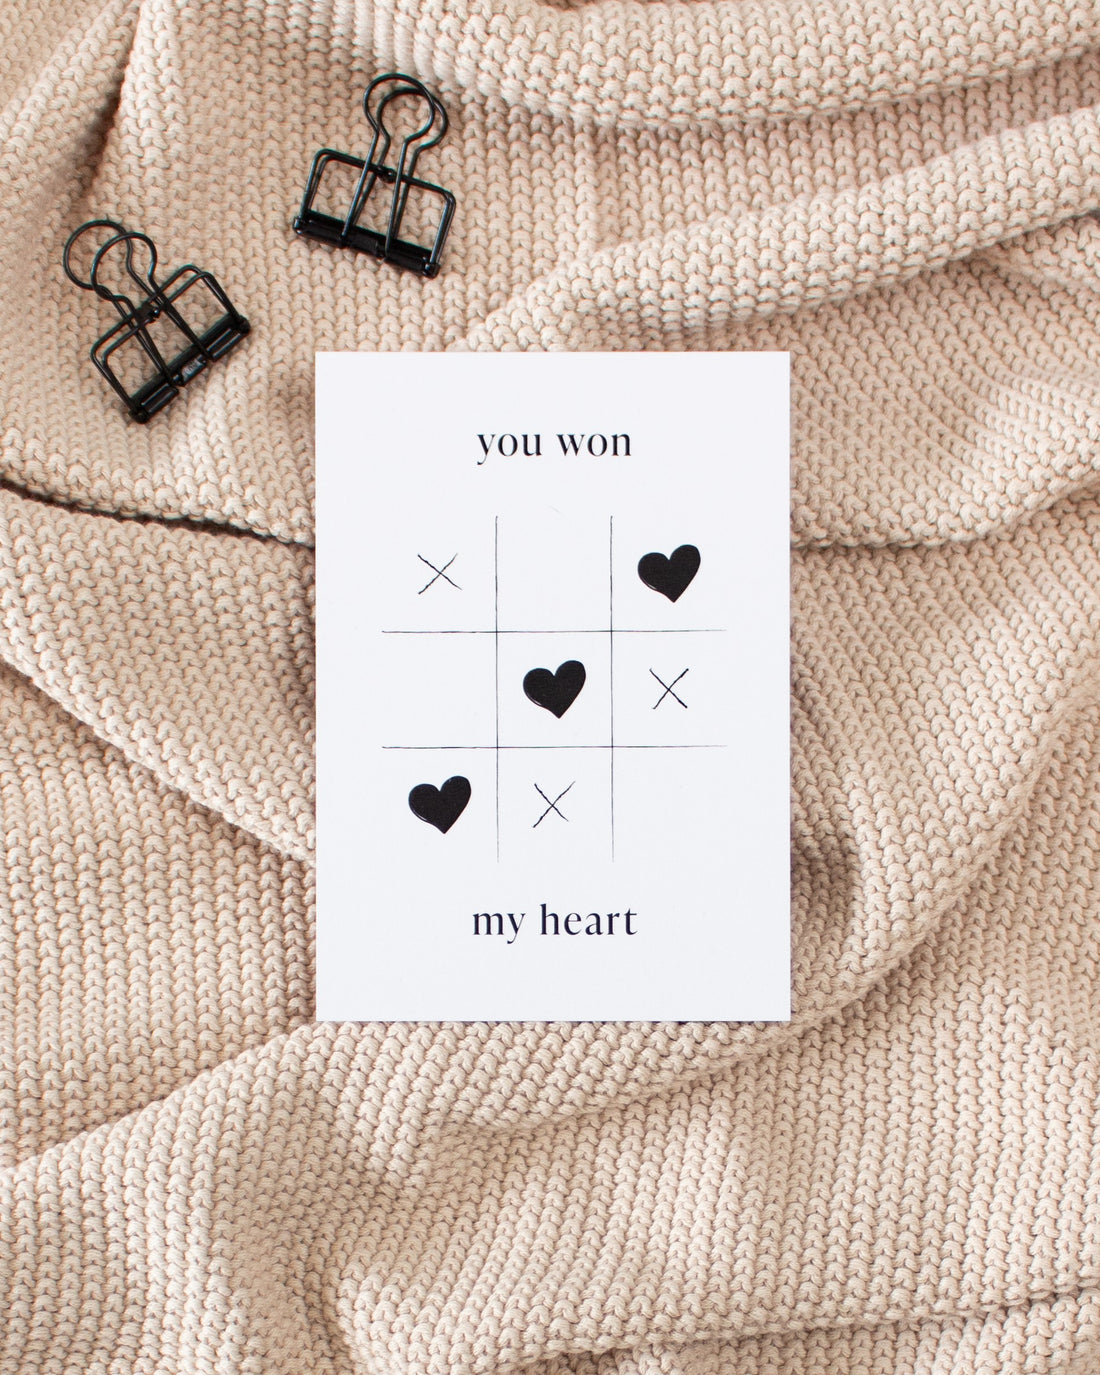 A white postcard laying on a beige knitted blanket with some black binder clips. The postcard design shows a game of tic-tac-toe being won with heart symbols. Text saying &quot;you won my heart&quot; is split up with the first two words being above the game and the rest below it.